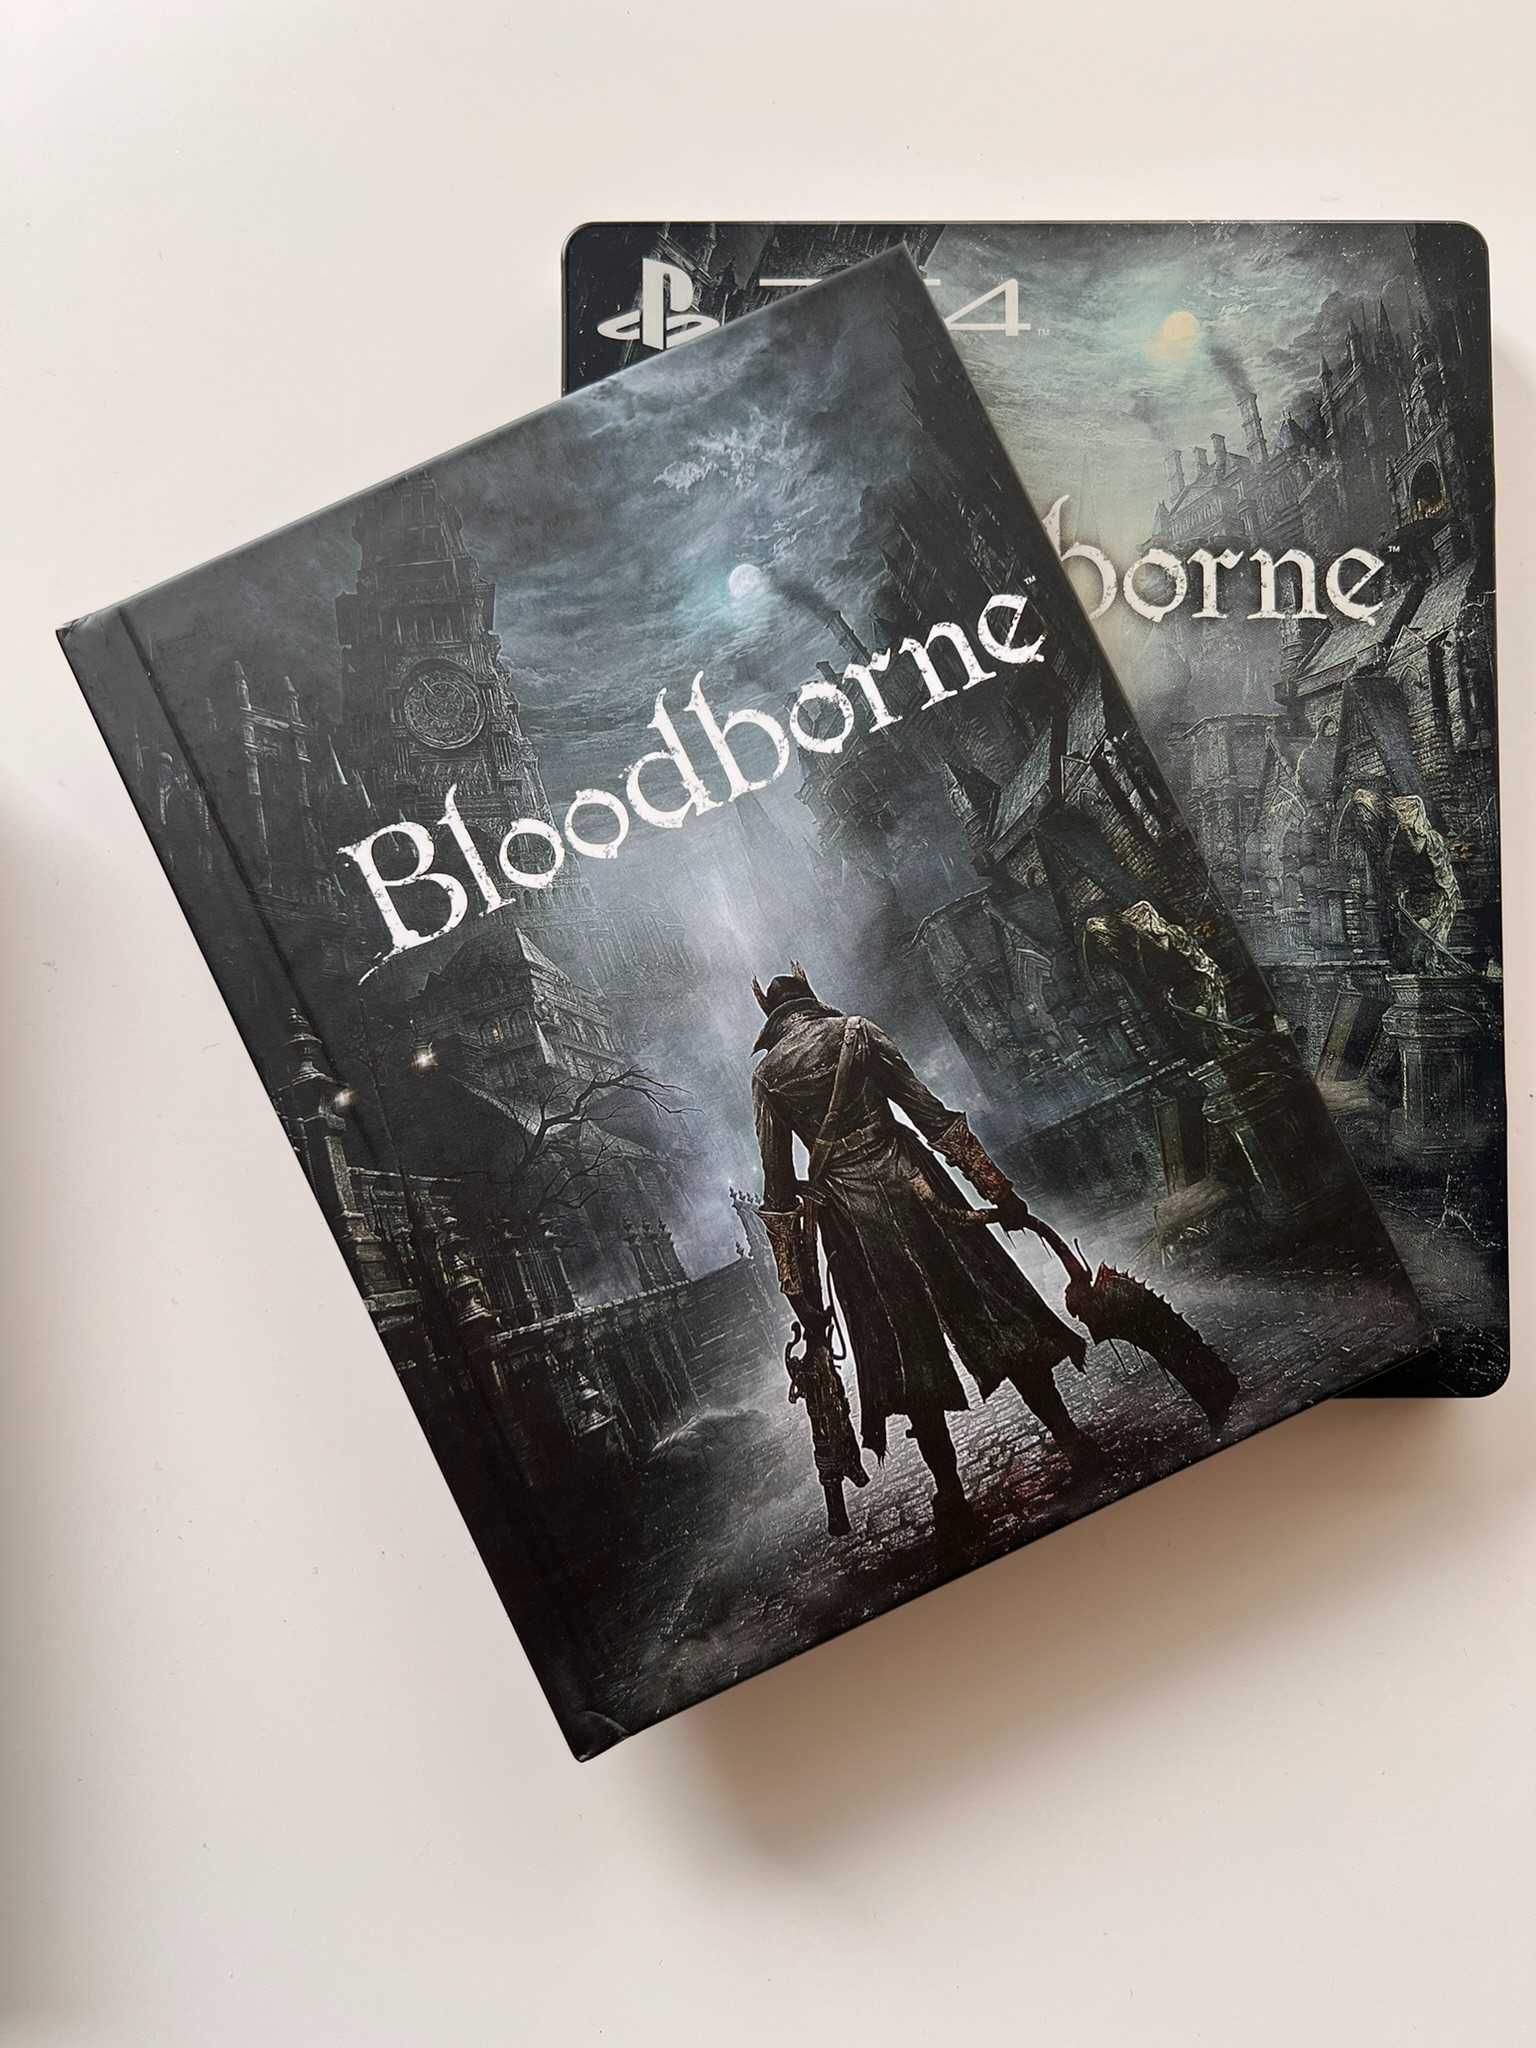 Bloodborne Collector’s Edition PS4 - Idealna, Ang, Unikat